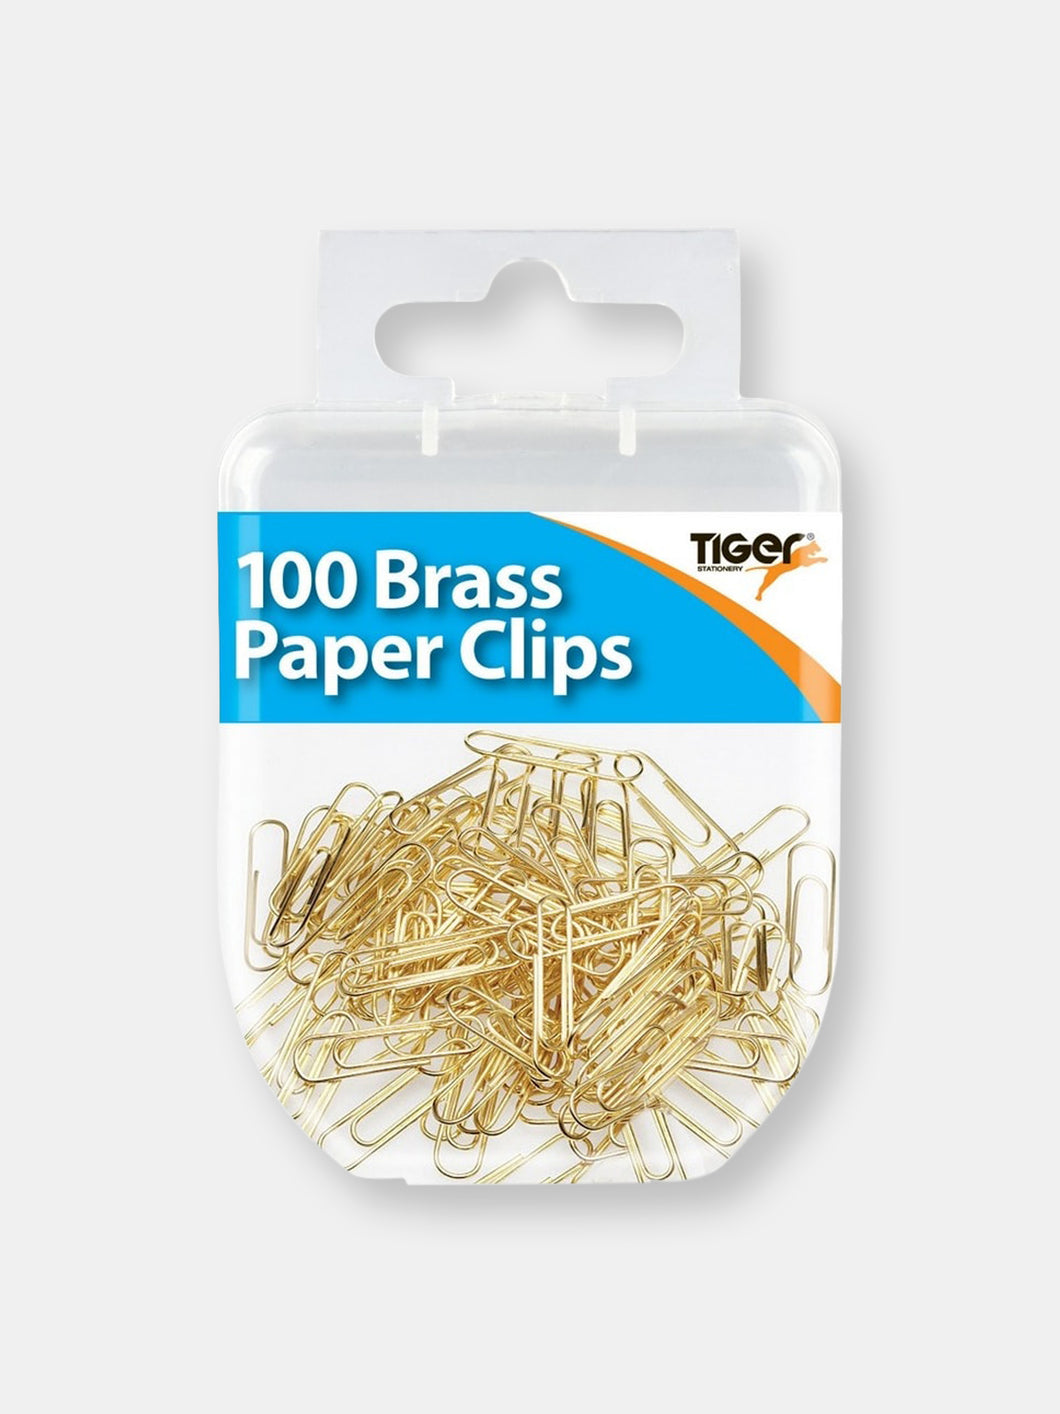 Tiger Stationery Essentials Paper Clips